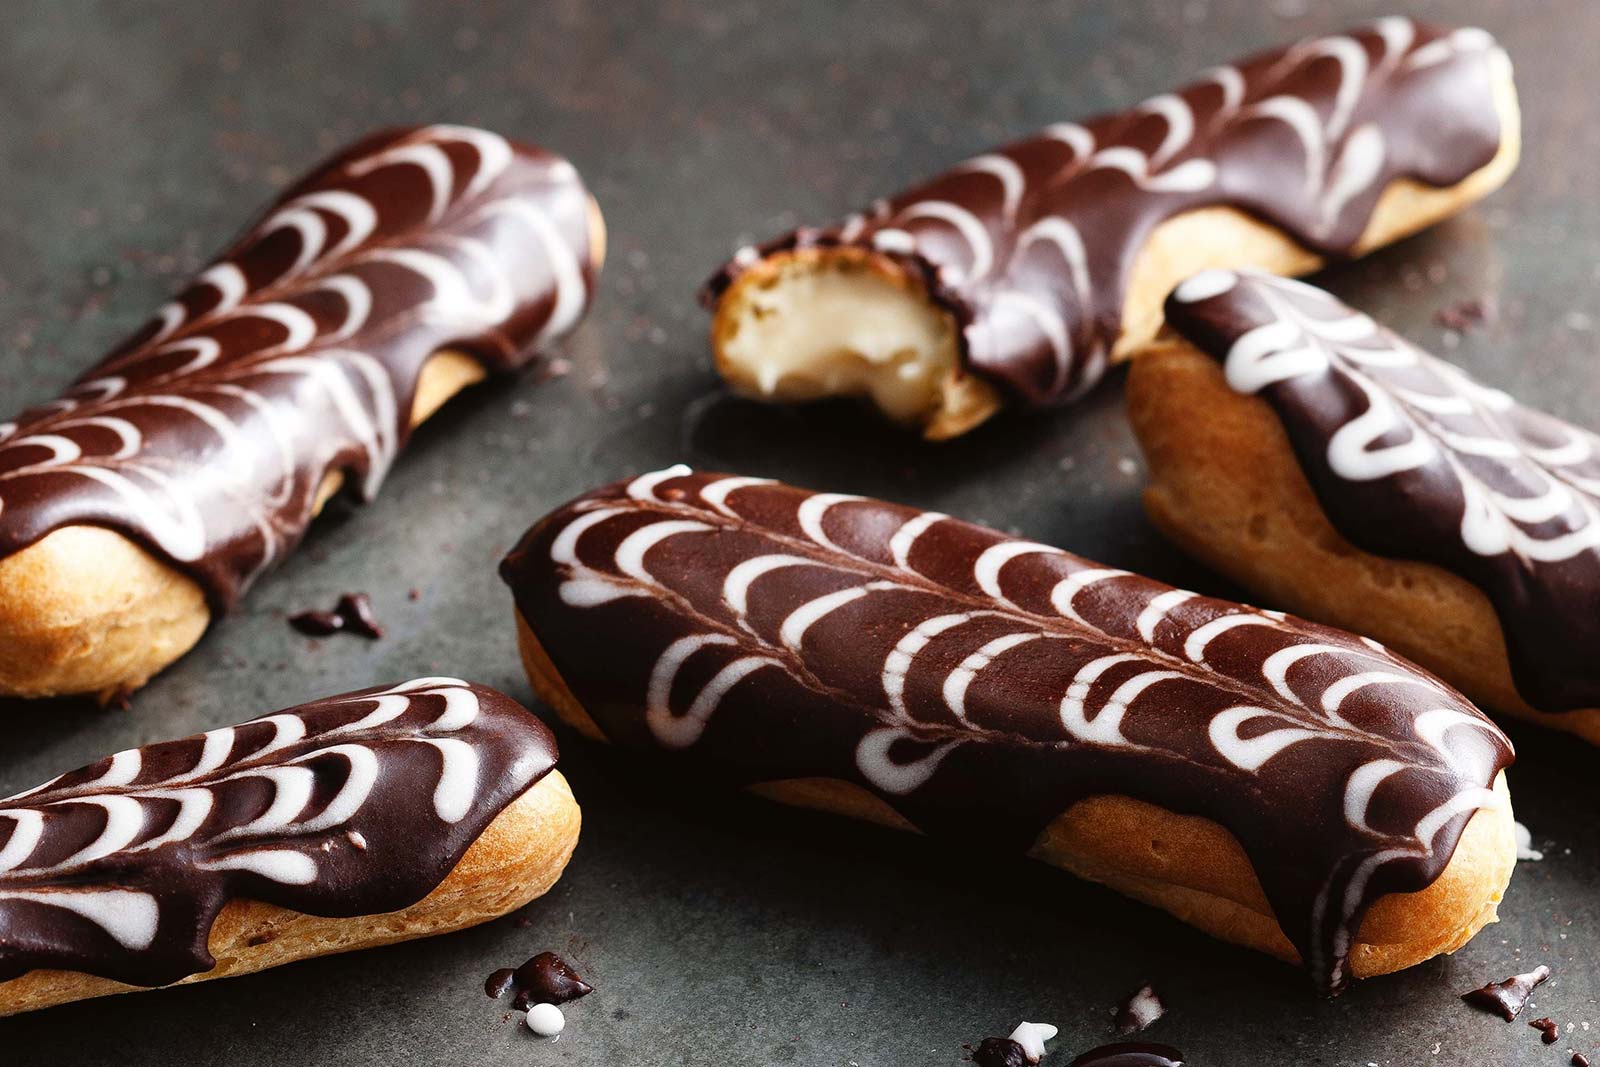 🍪 Only a True Chocoholic Will Have Eaten at Least 13/25 of These Treats Chocolate Eclair